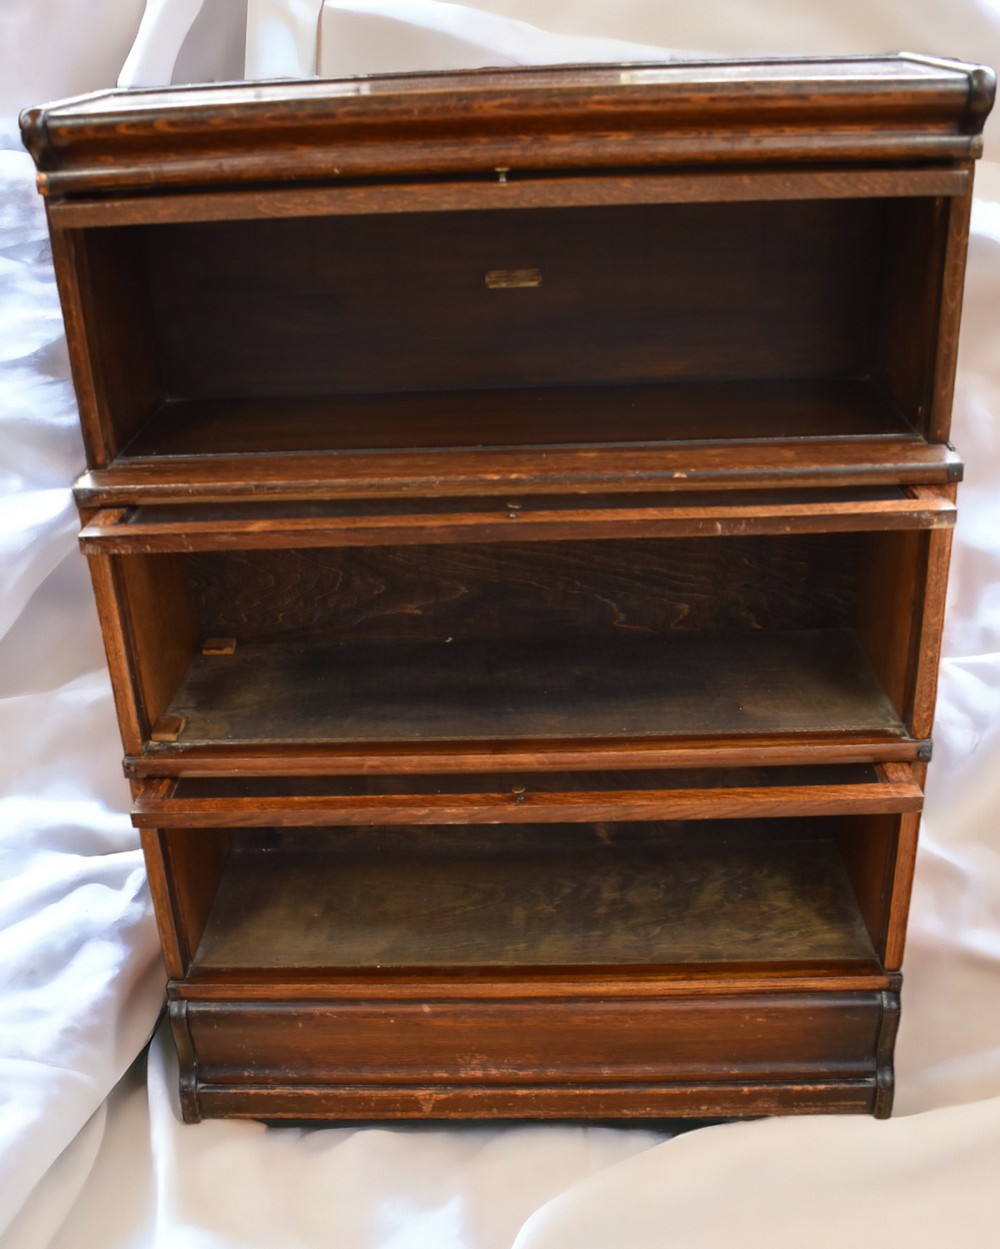 The Globe Wernick Co Ltd of London early 20th Century oak three glazed bookcase with label, in great - Image 2 of 3